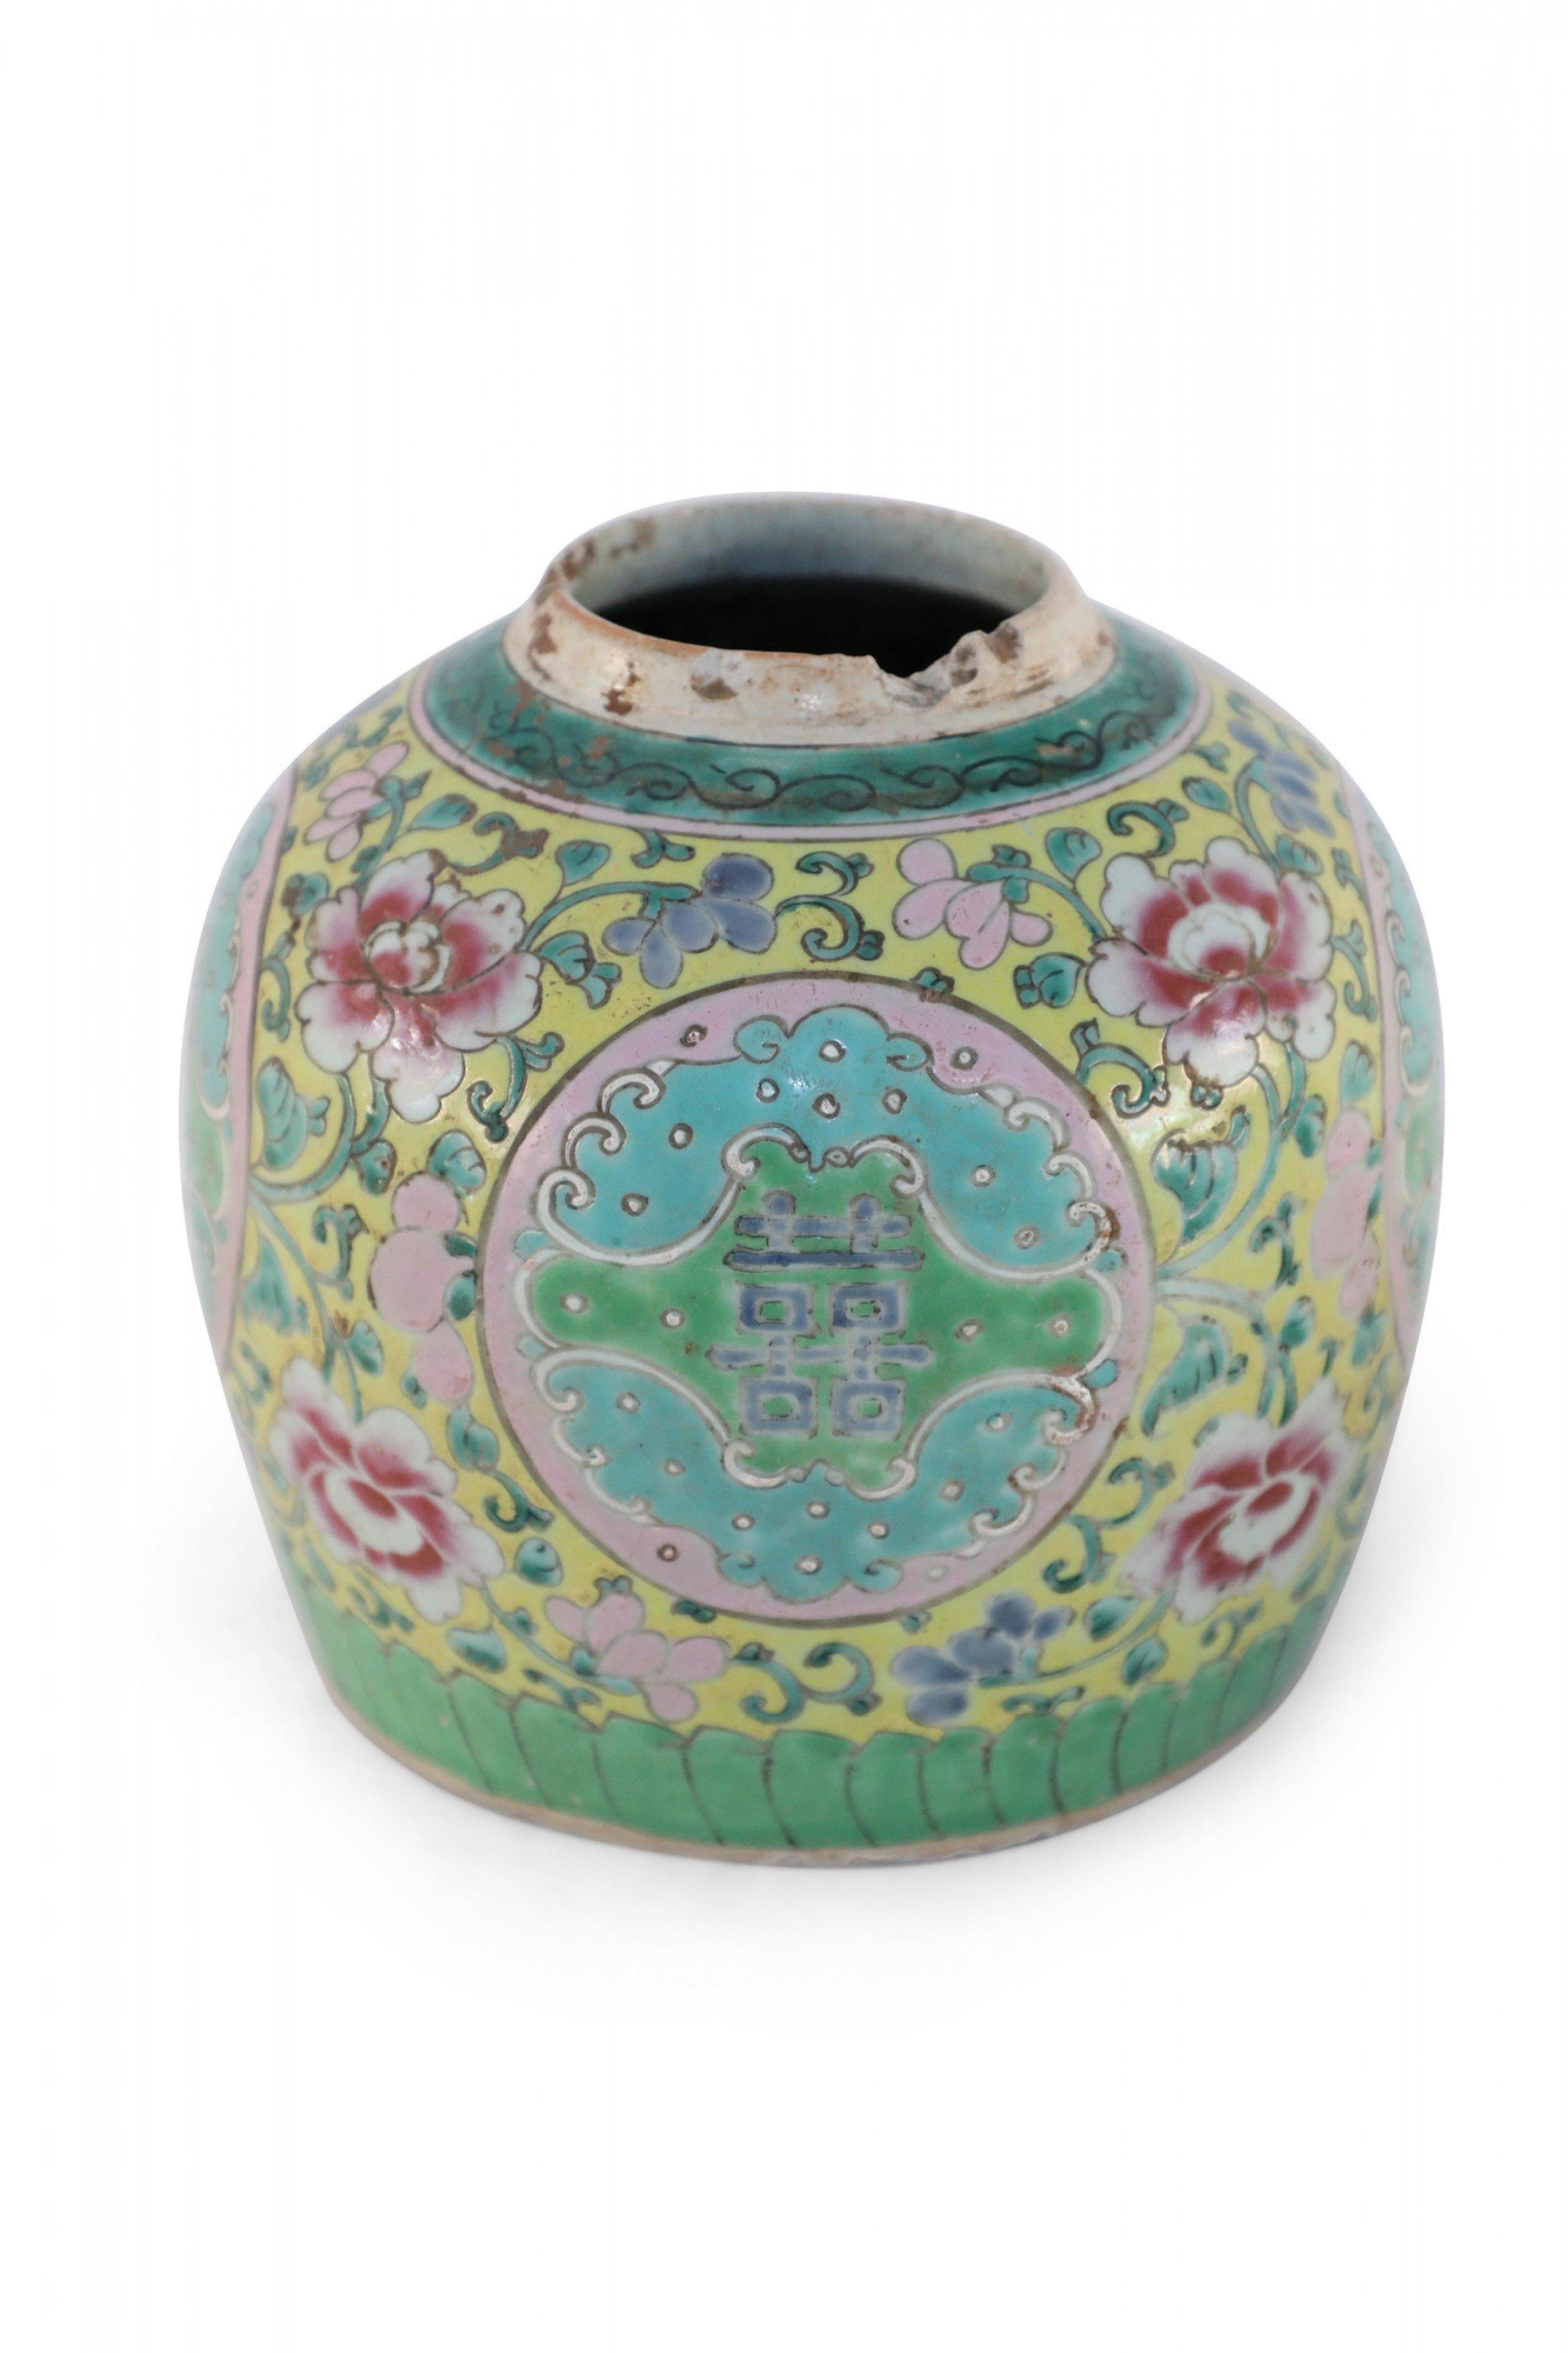 20th Century Chinese Yellow, Green and Pink Floral Porcelain Watermelon Jar